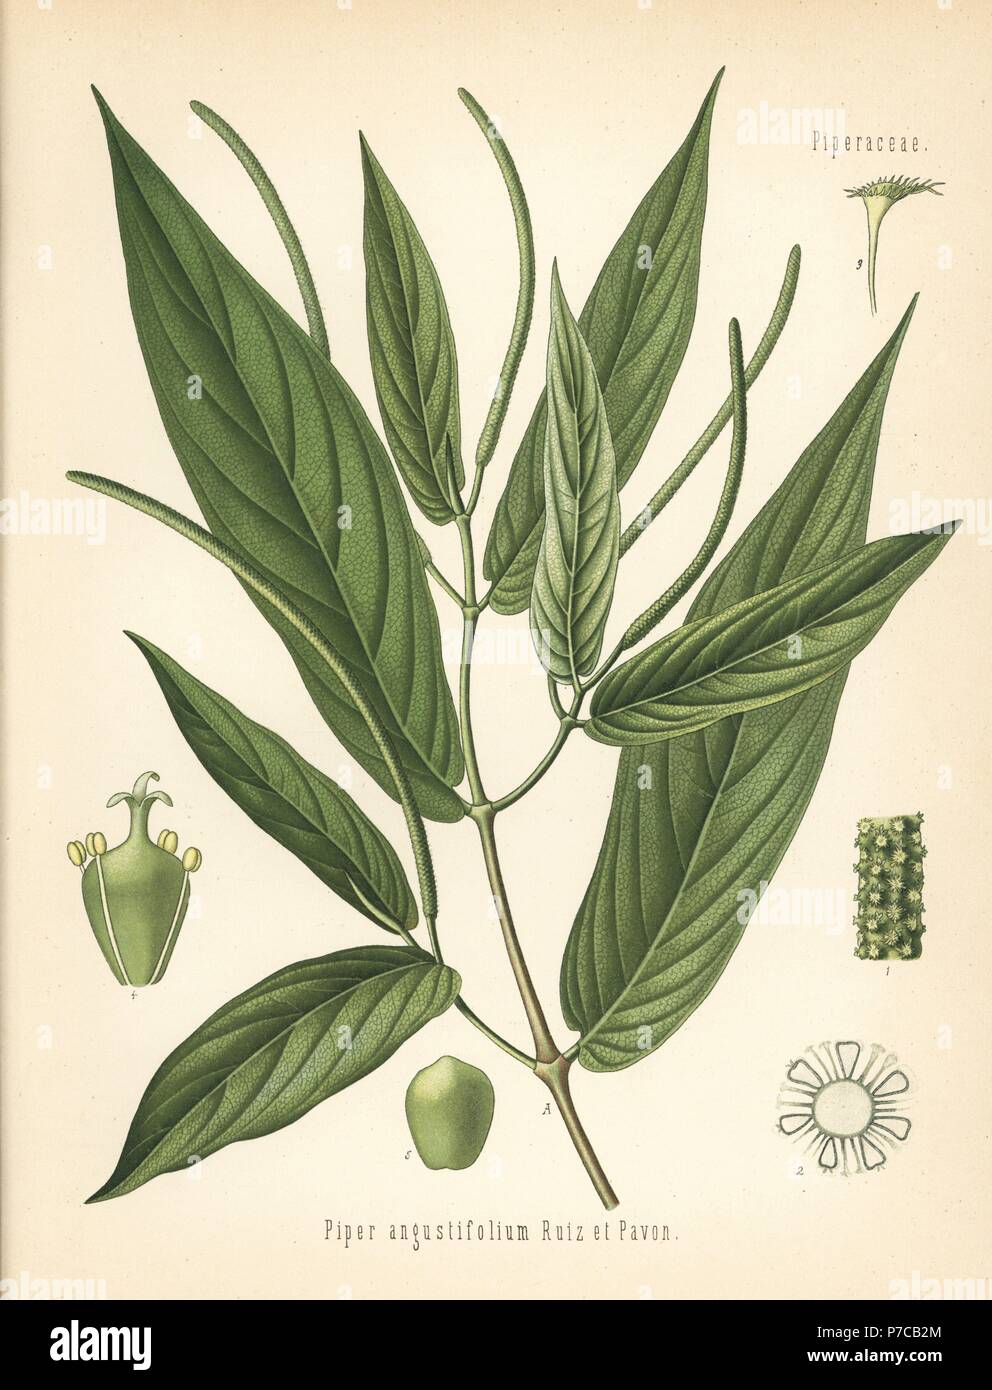 Spiked pepper or matico, Piper aduncum (Piper angustifolium). Chromolithograph after a botanical illustration from Hermann Adolph Koehler's Medicinal Plants, edited by Gustav Pabst, Koehler, Germany, 1887. Stock Photo